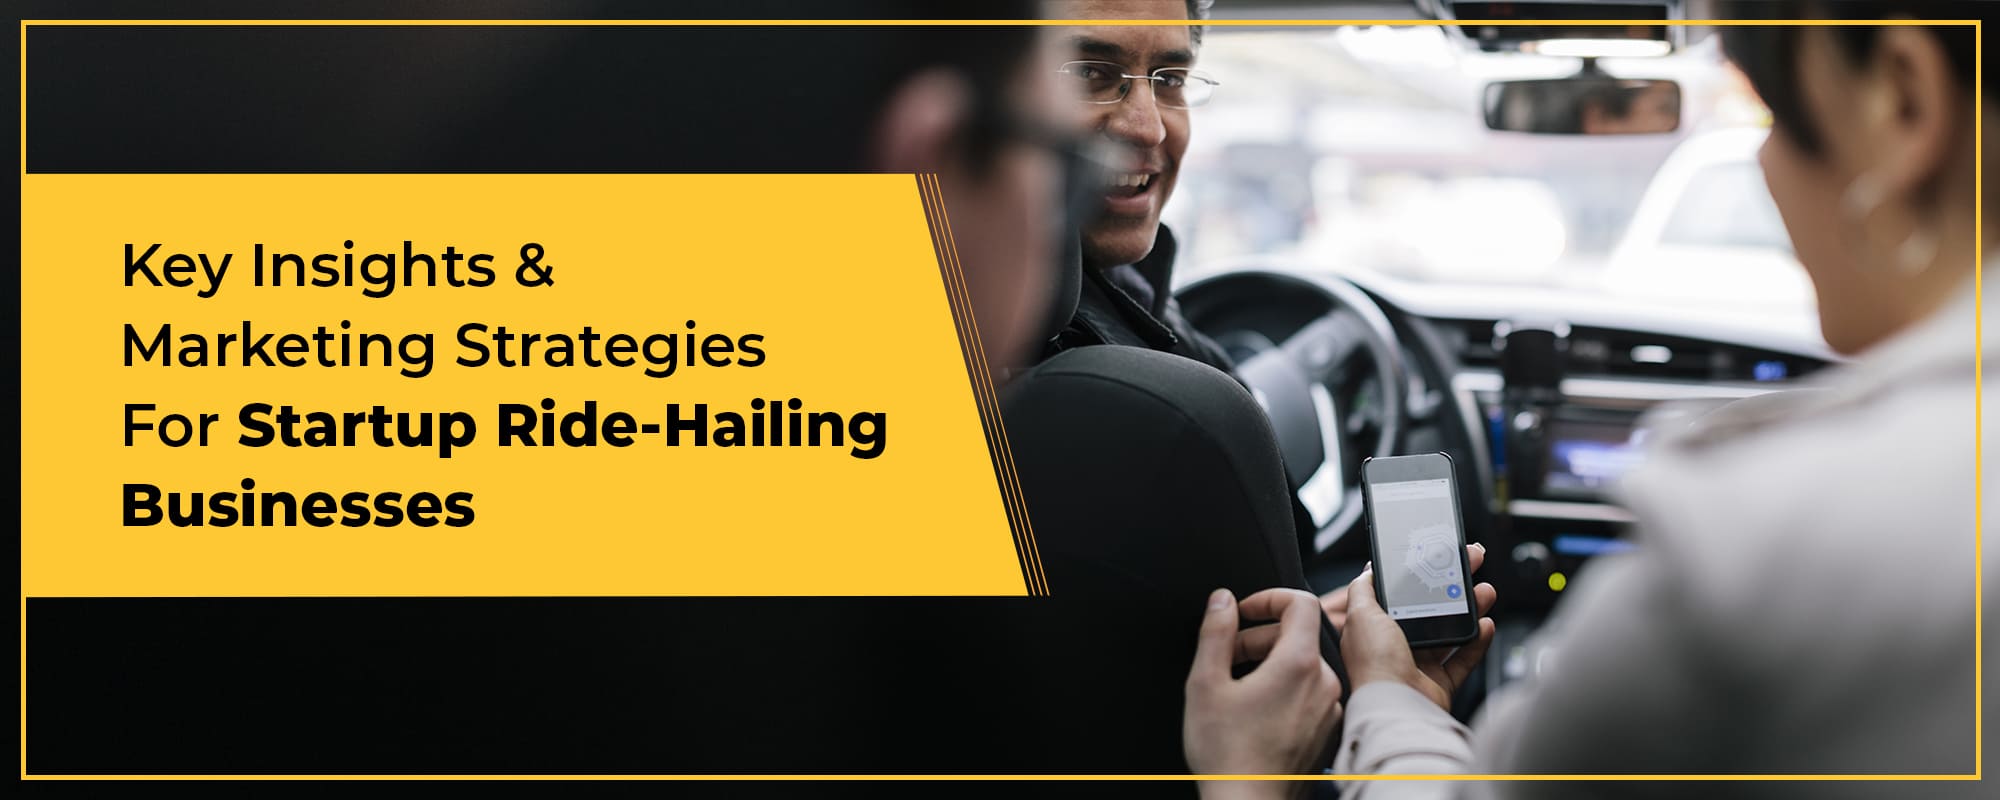 Key Attributes For Startups To Enable Traction & Growth In The Ride Hailing Industry